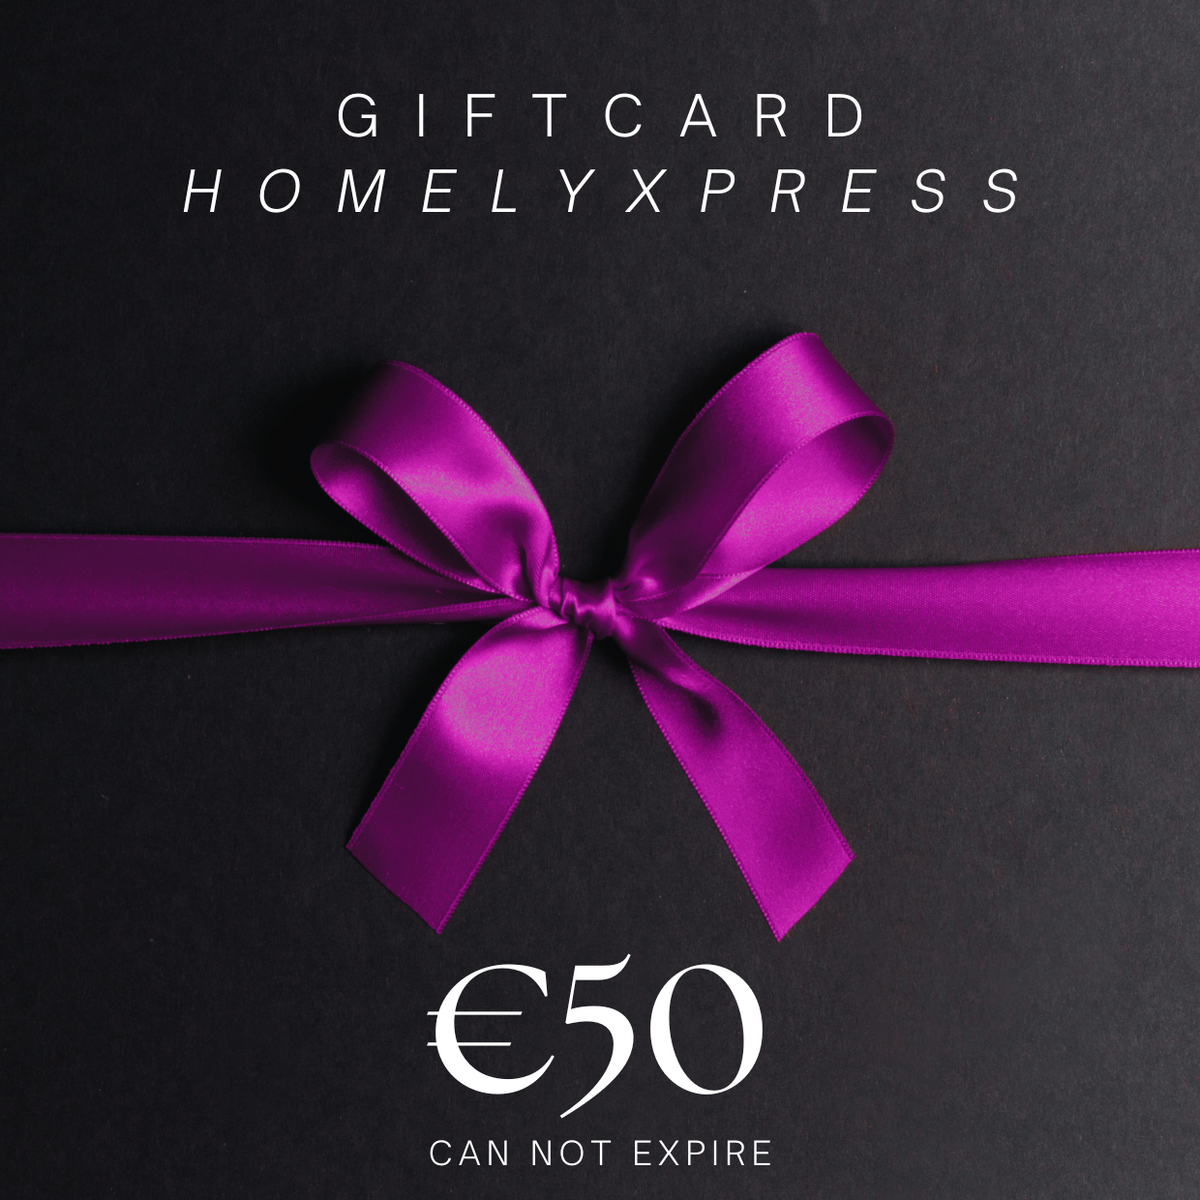 Homelyxpress - Gift card